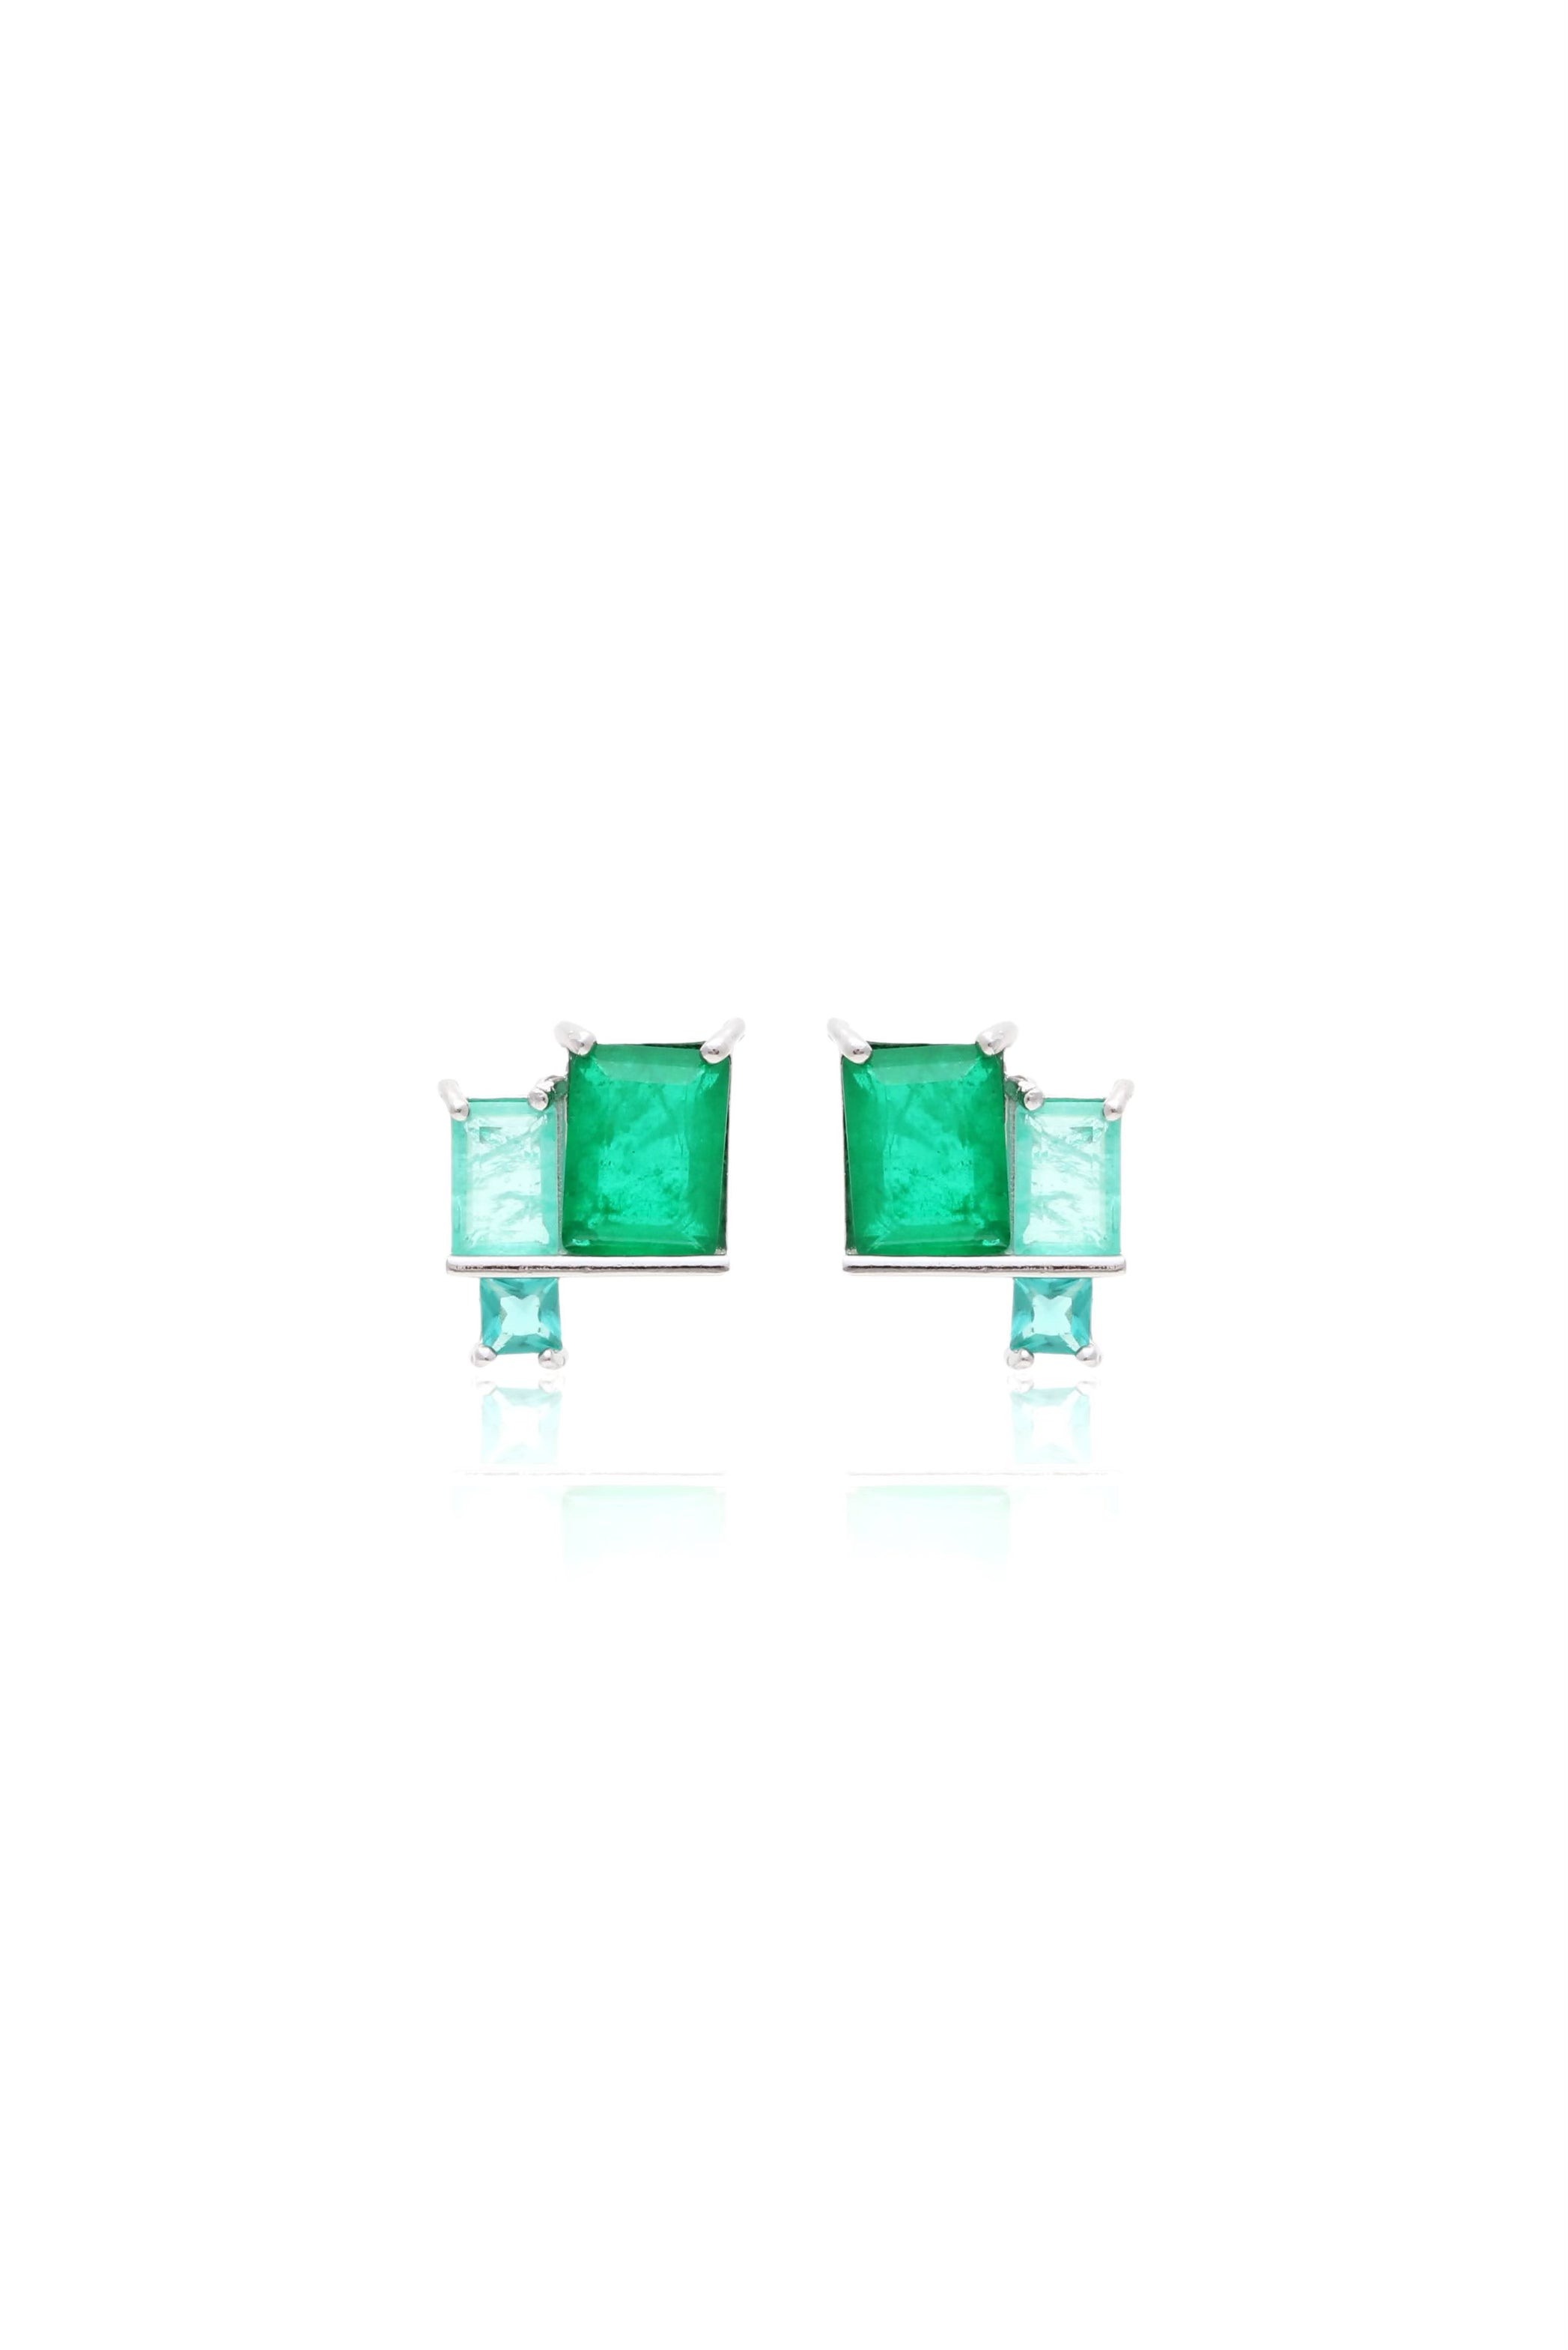 Shades of Green Earrings